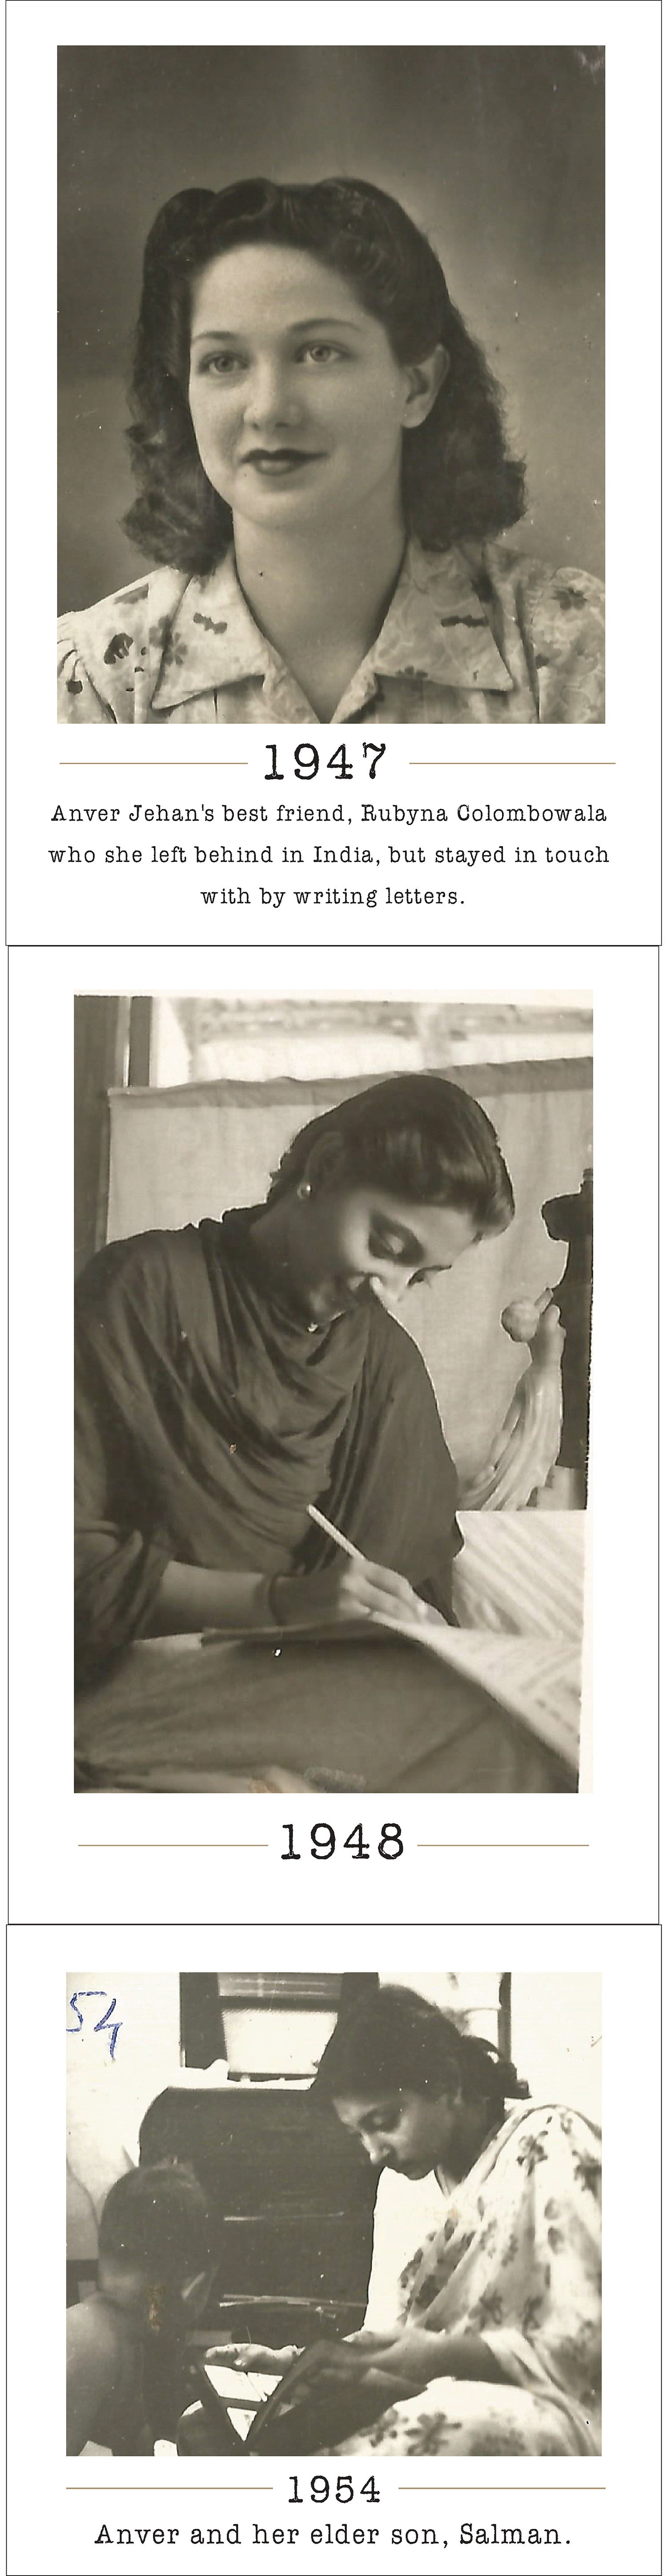 Three black-and-white photographs: A woman with curled hair wearing a button-up shirt (top), a woman wearing a draped garment writing at a table (middle) and a woman reading to a child (bottom)